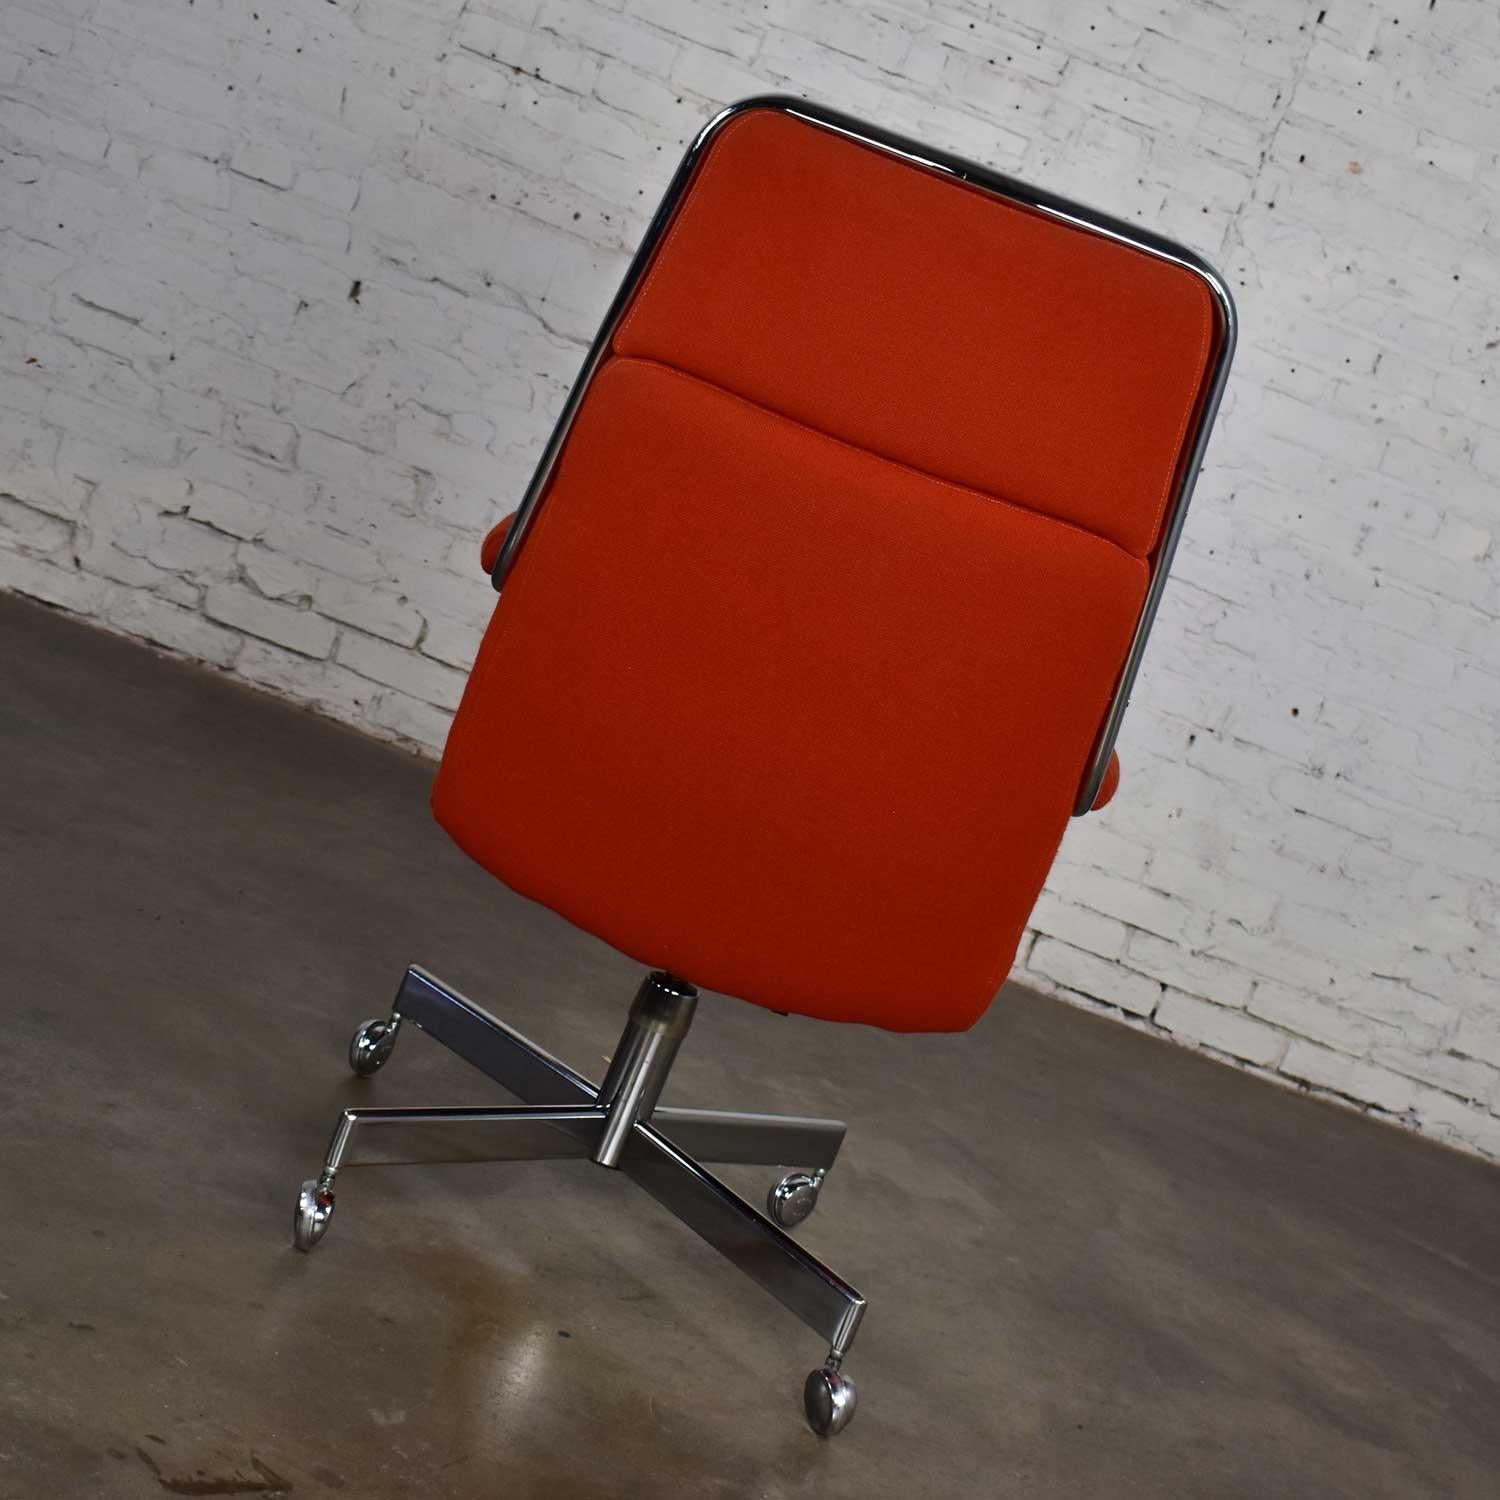 American Chromcraft Adjustable Armed High Back Rolling Office Chair Orange Hopsack Fabric